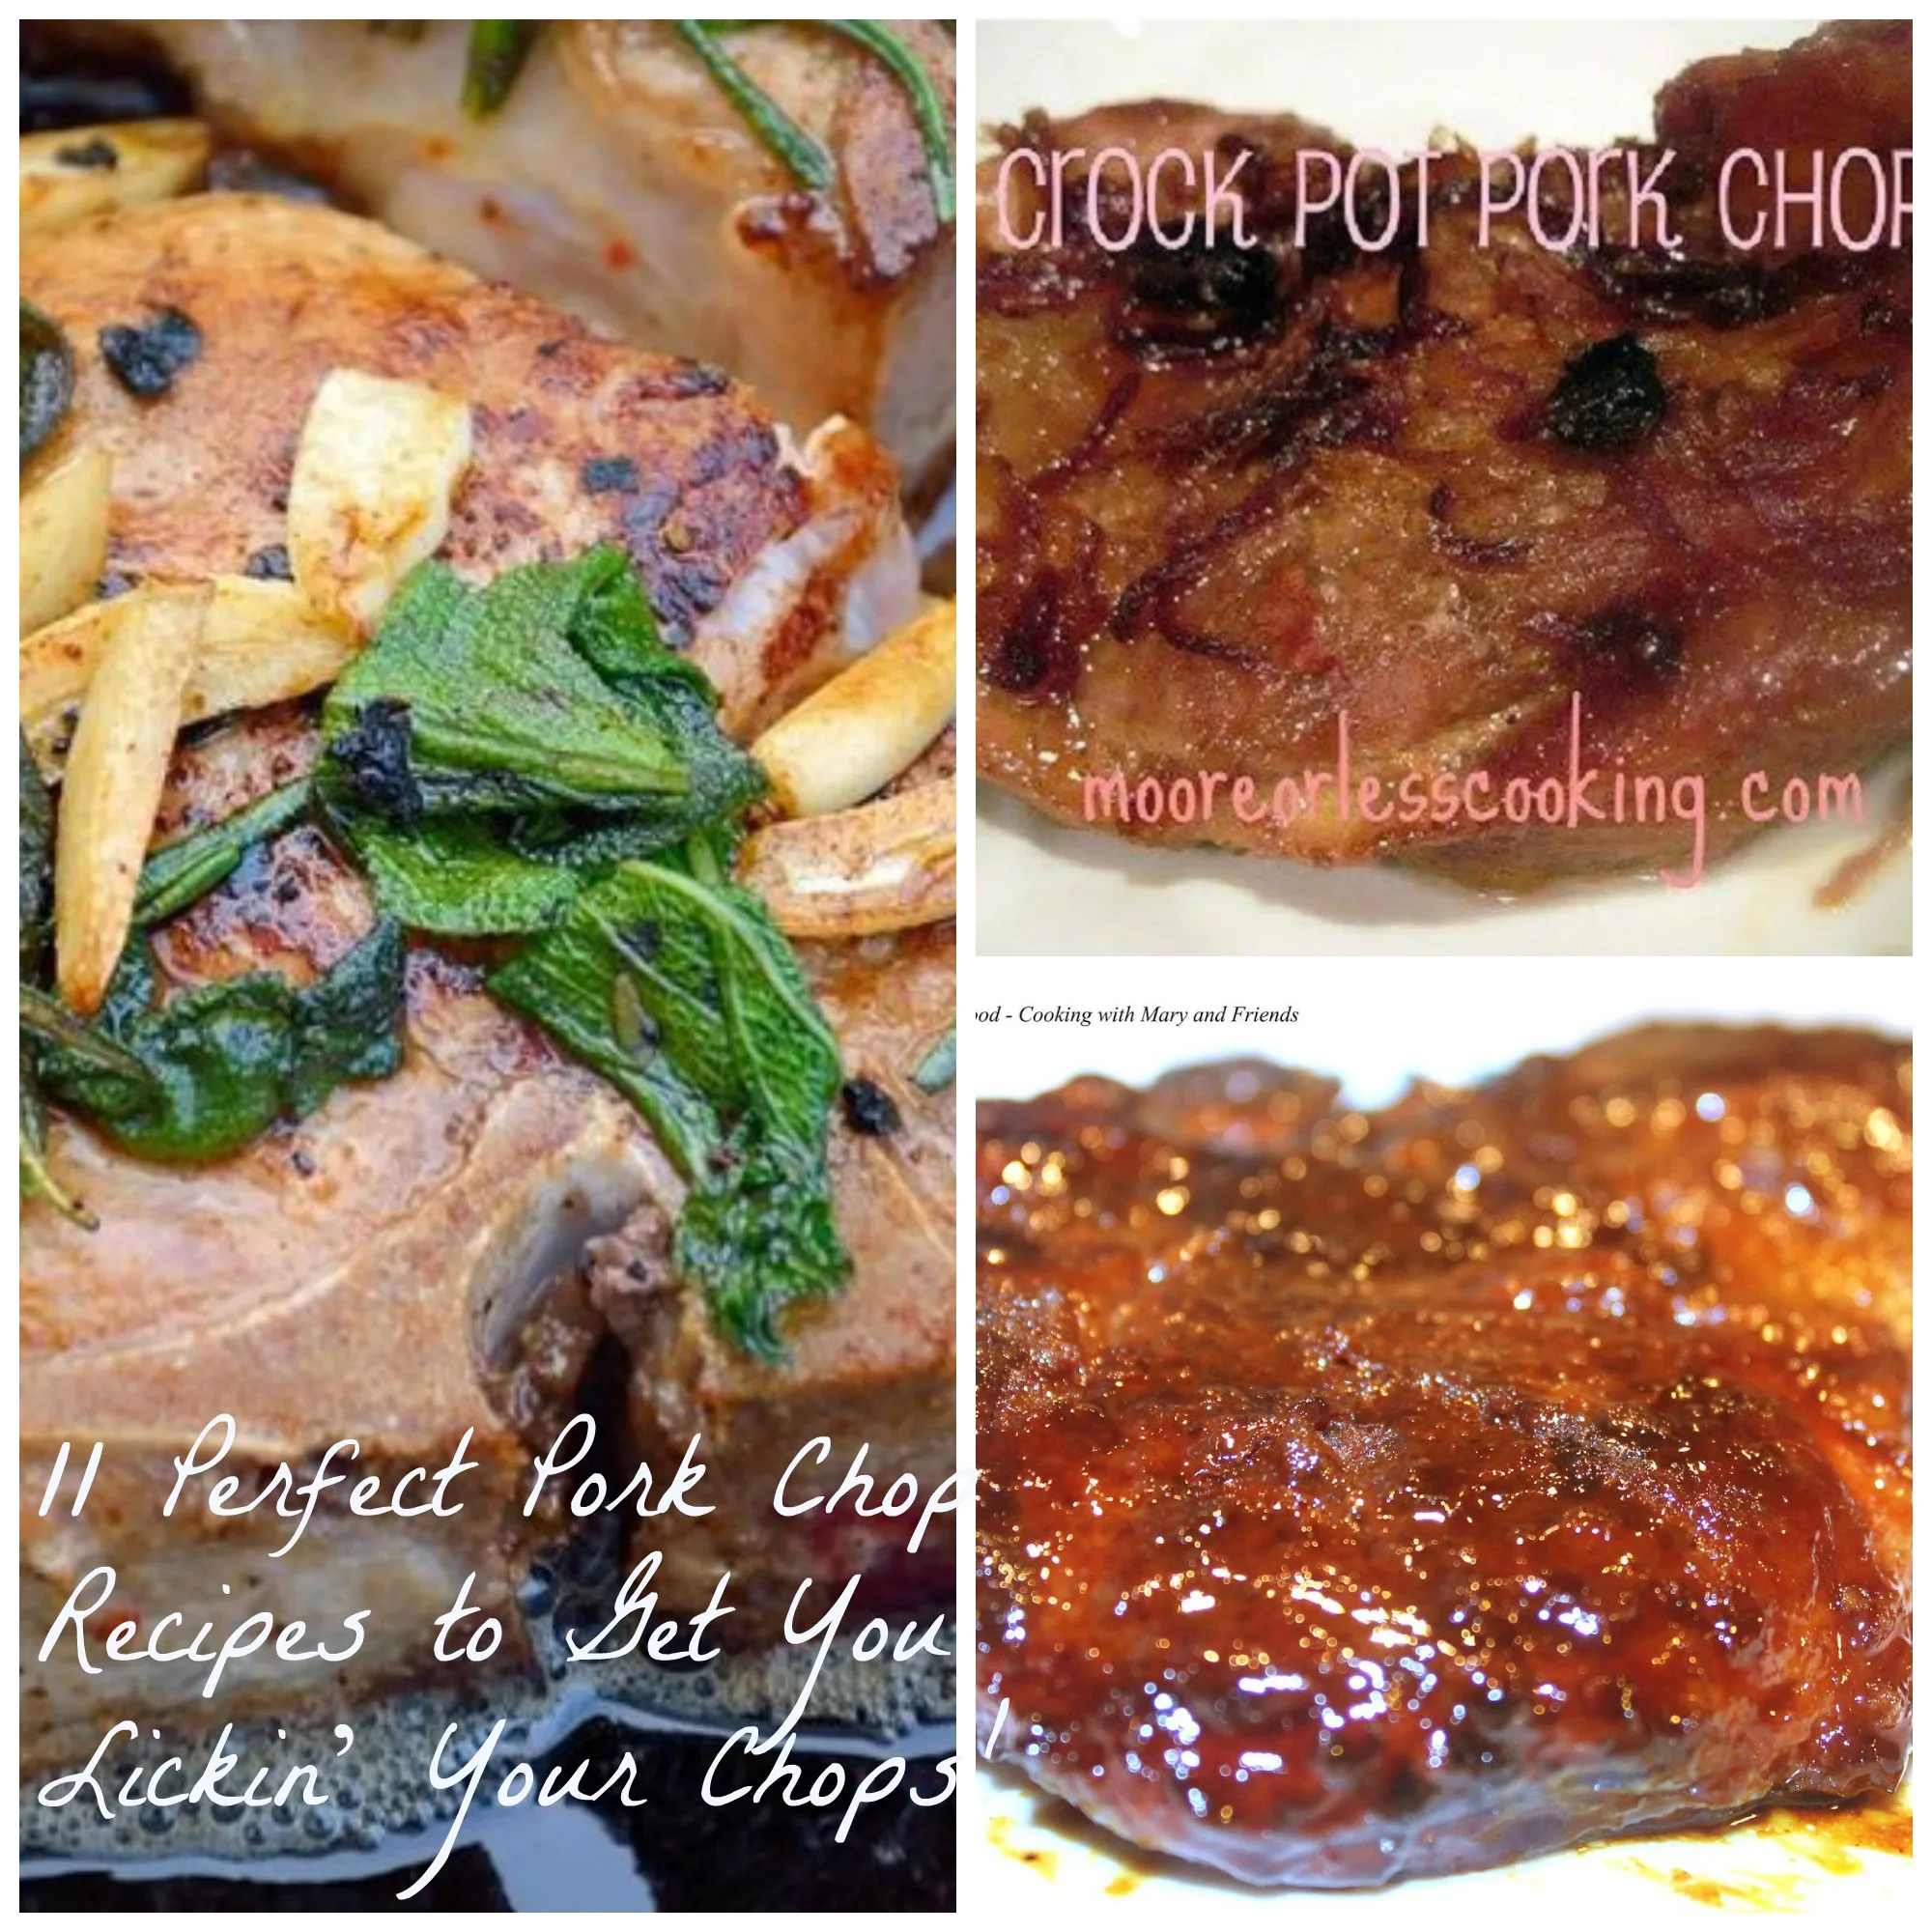 11 Perfect Pork Chop Recipes to Get You Lickin’ Your Chops!